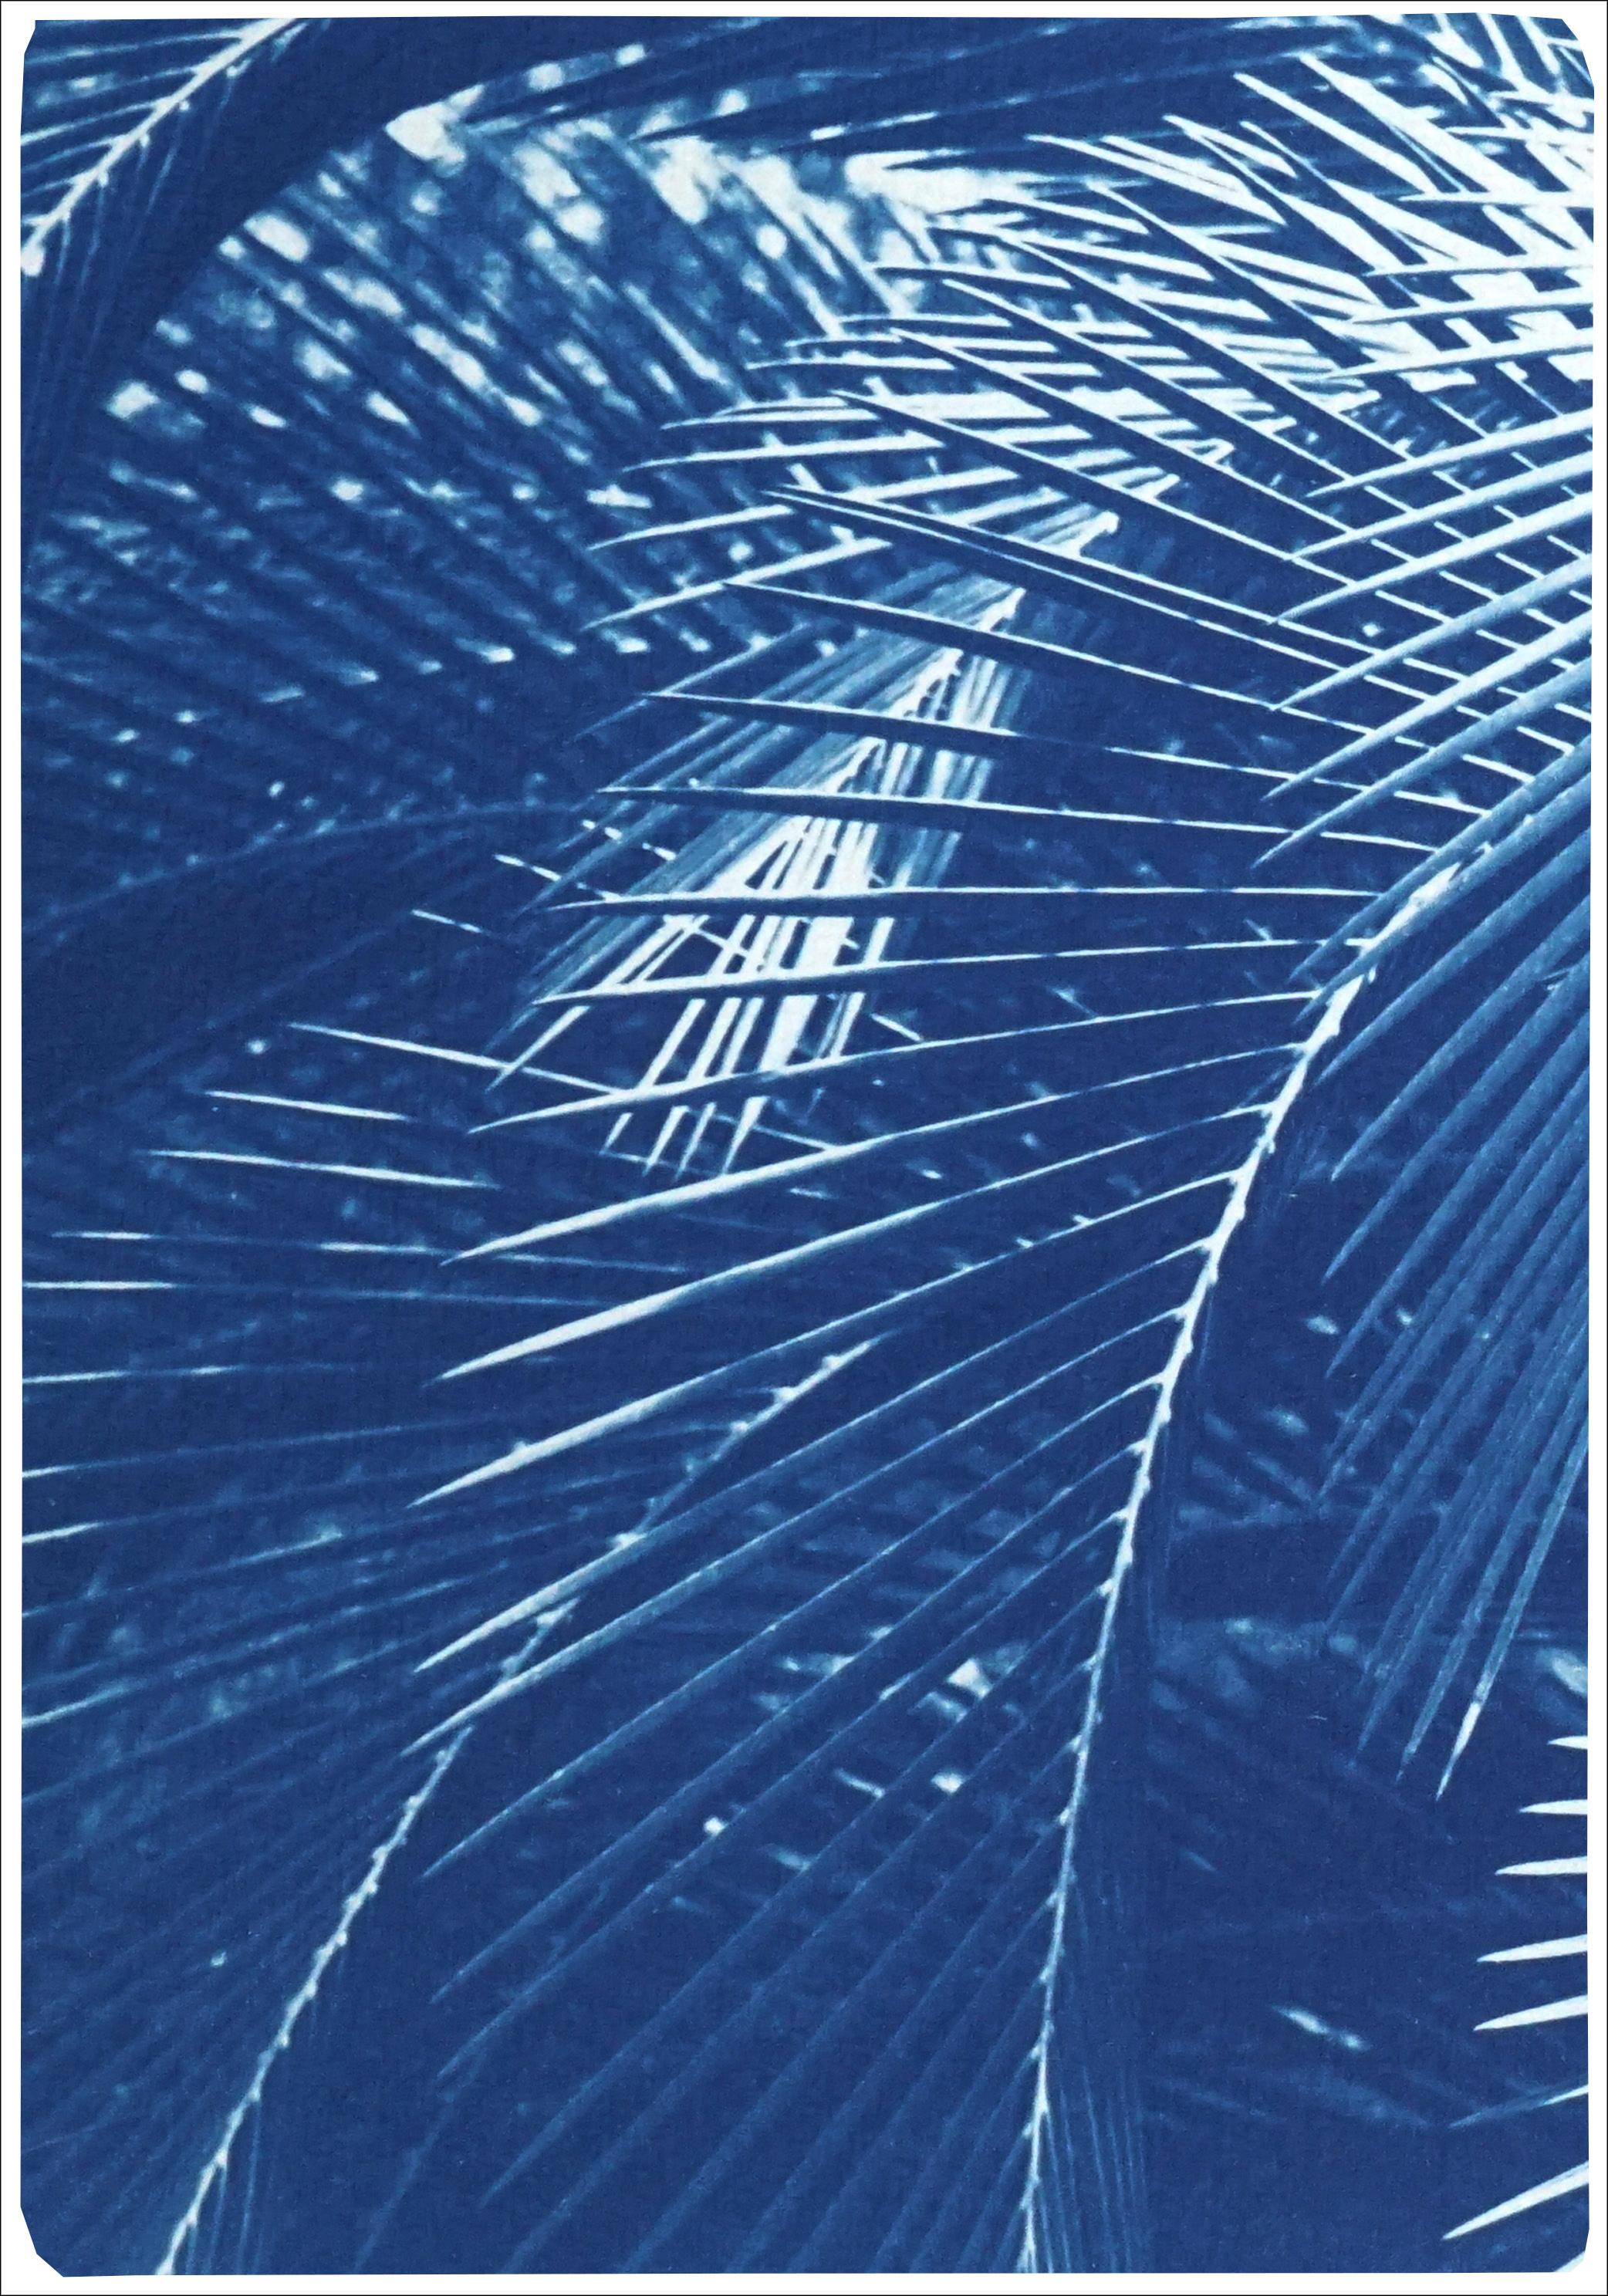 Botanical Triptych of Shady Majesty Palm Leaves Garden, Blue Tones Cyanotype  - Naturalistic Print by Kind of Cyan